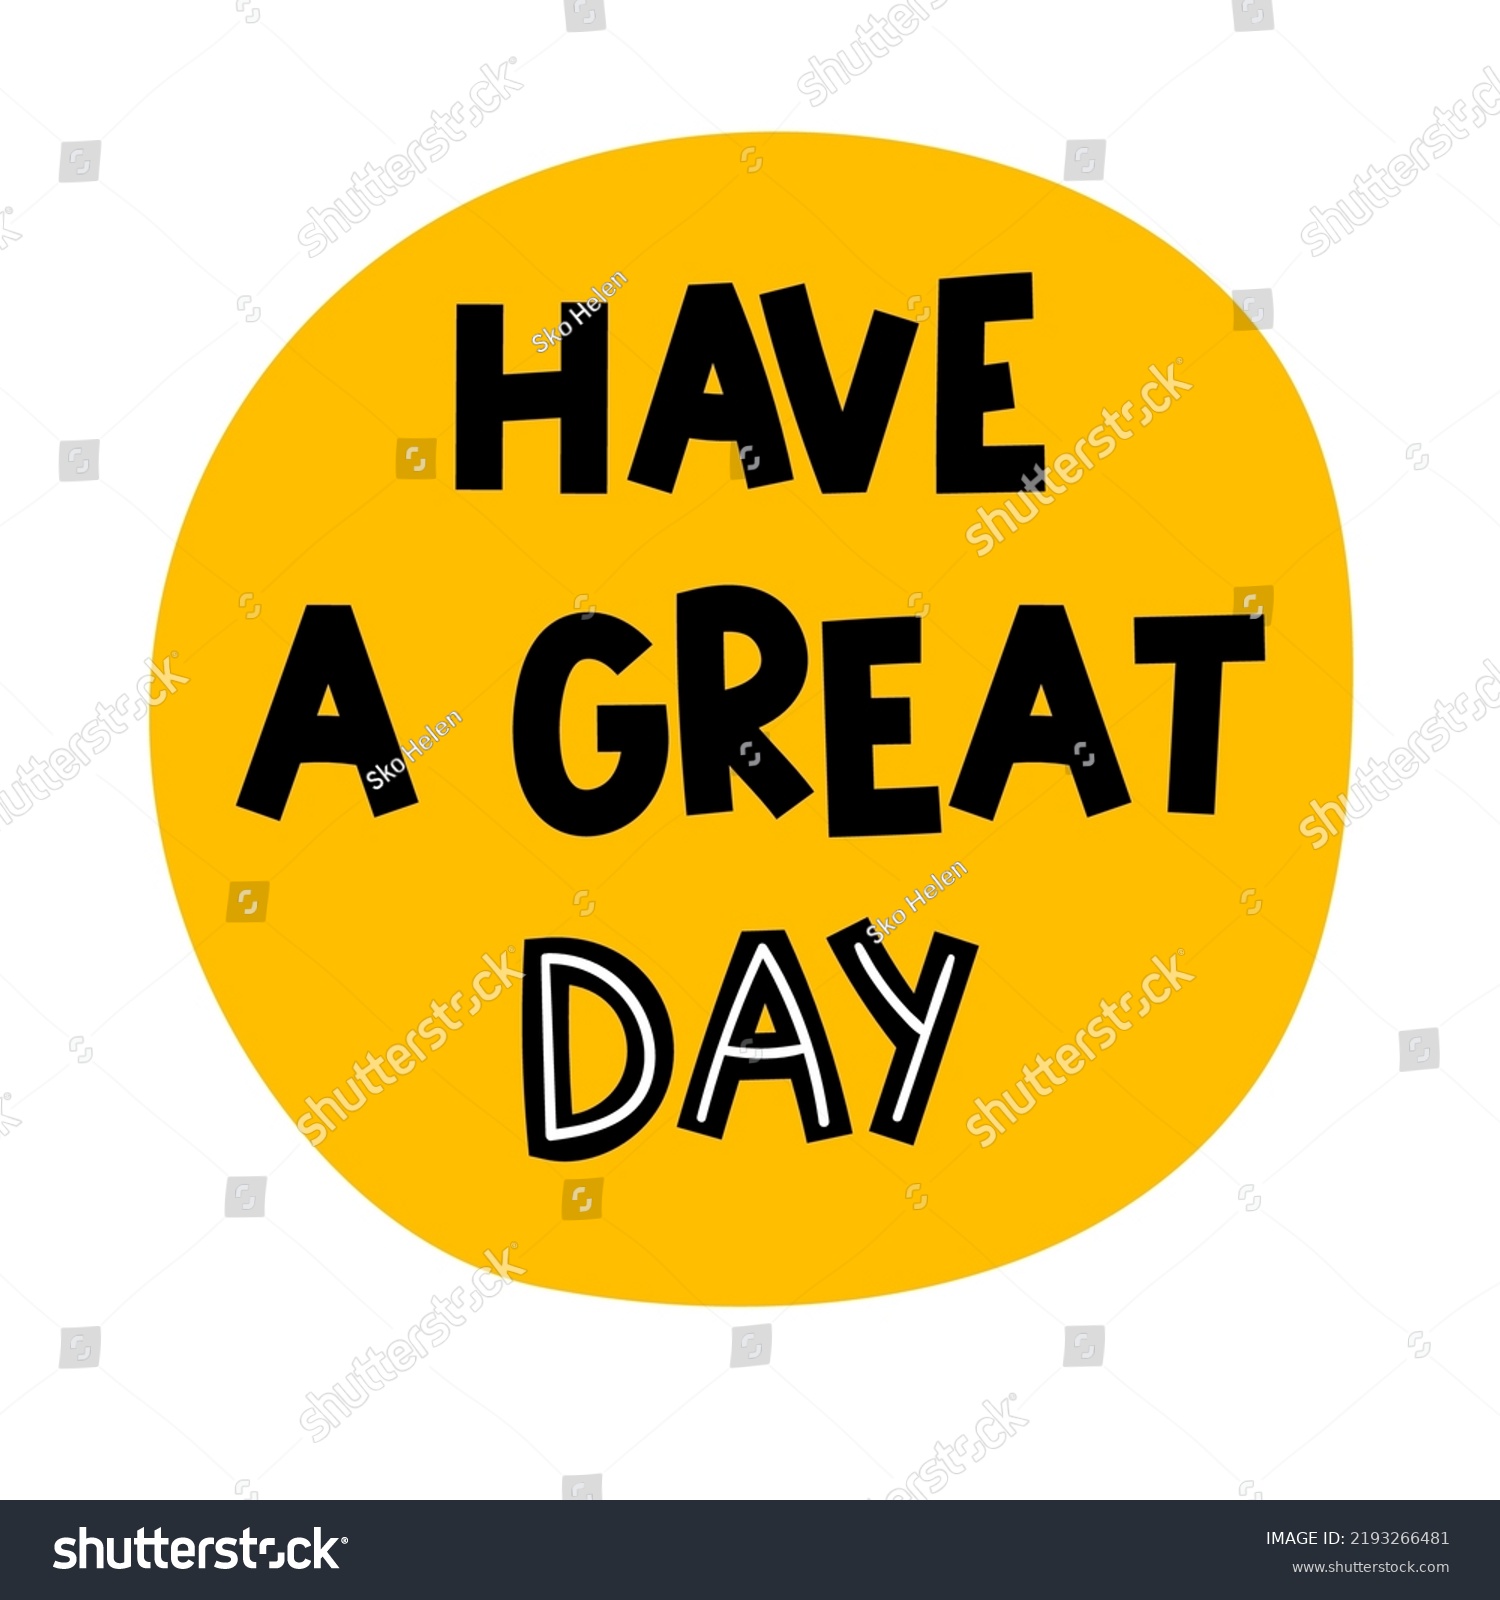 Have Great Day Hand Drawn Lettering Stock Vector Royalty Free 2193266481 Shutterstock